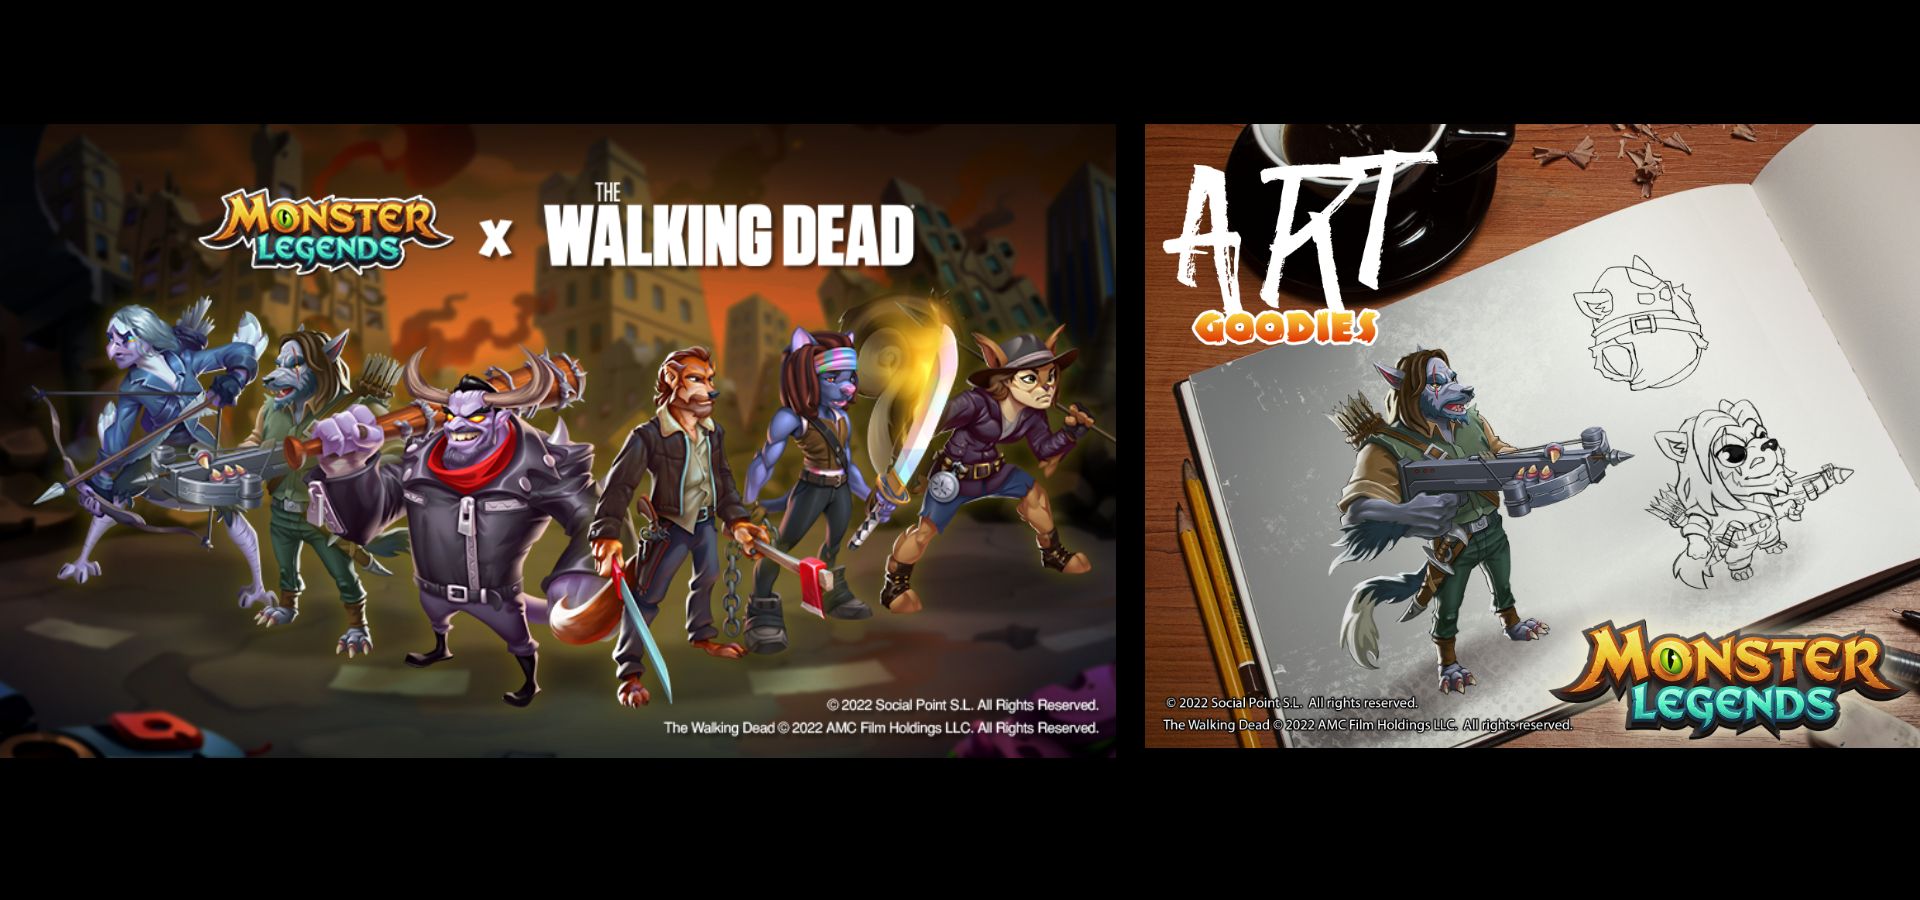 From The Walking Dead to Monster Legends: A Galactic Journey